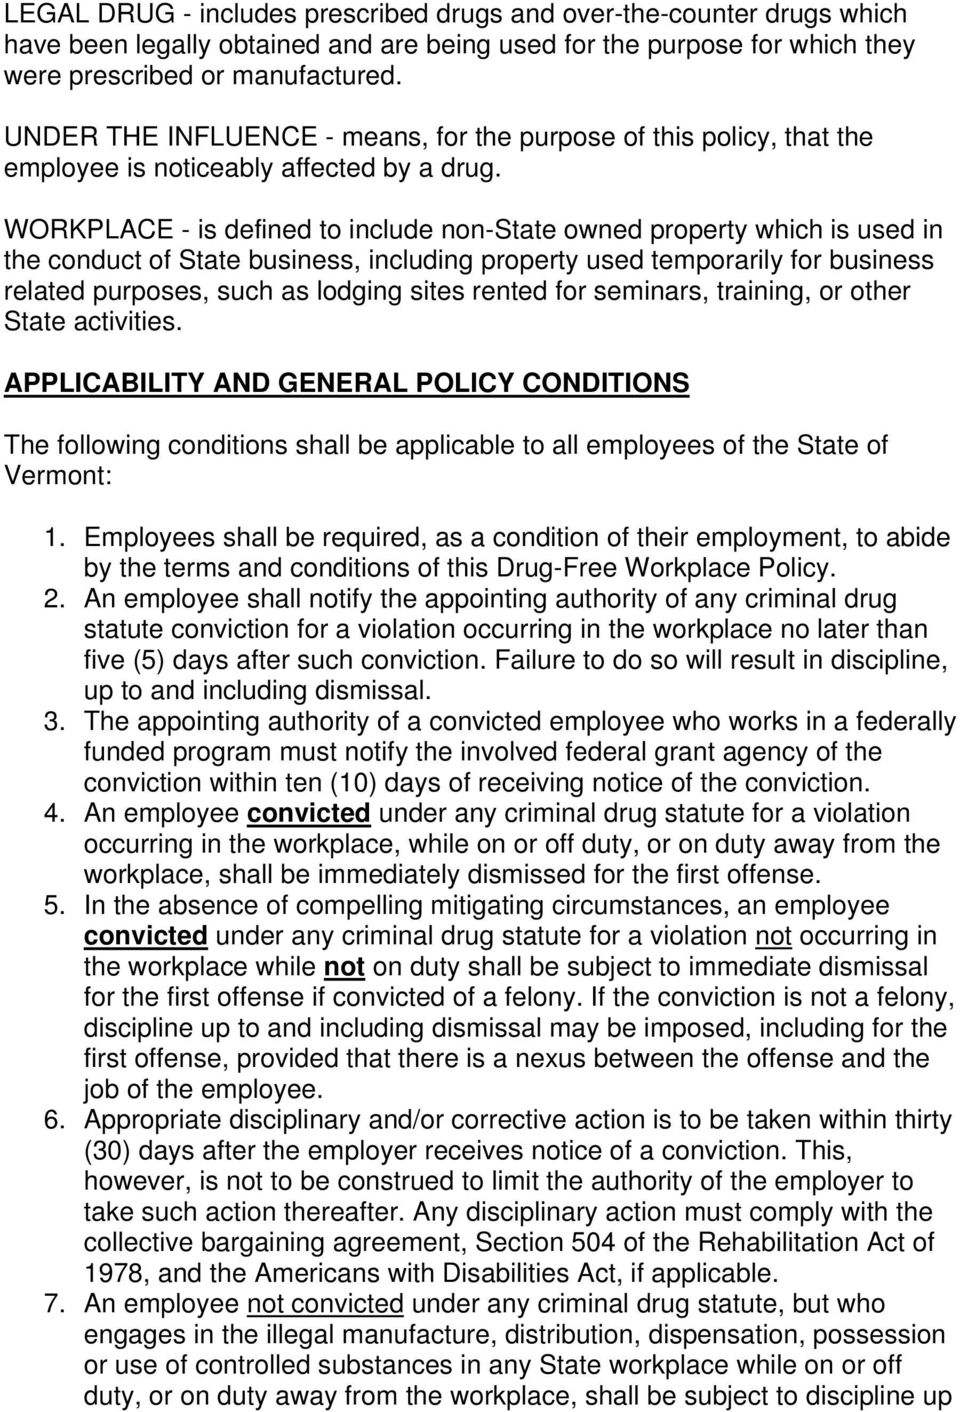 WORKPLACE - is defined to include non-state owned property which is used in the conduct of State business, including property used temporarily for business related purposes, such as lodging sites